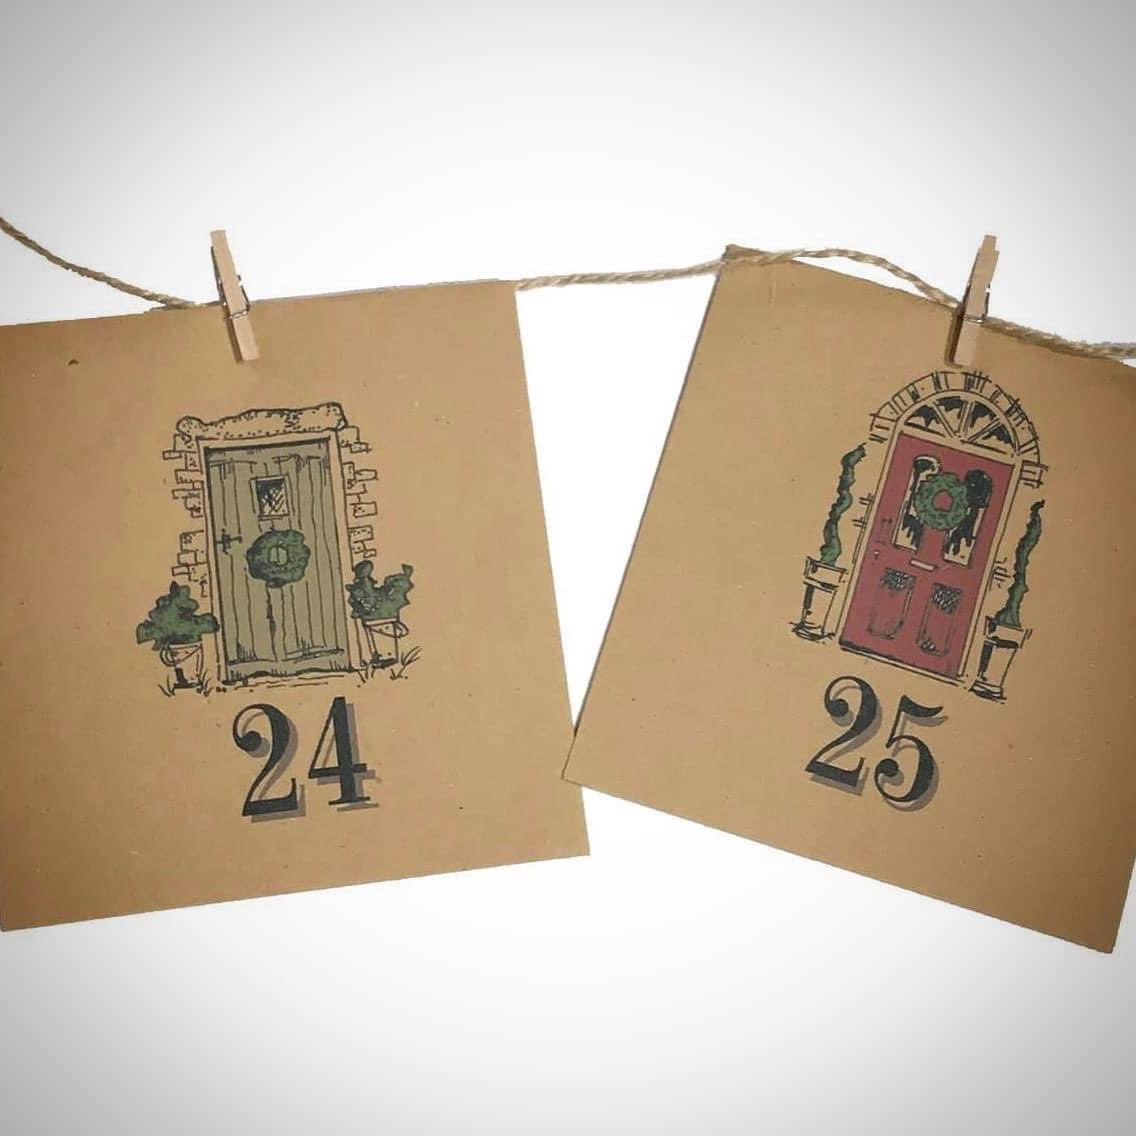 After much thought, animated discussions & in-depth deliberation, as a team we have decided to offer a PP Advent Calendar (1:48) & a 12 Days Of Christmas Calendar (1:24) again this year. 
More info will be released next week, so as ever, watch this space! 
😊
#petiteproperties